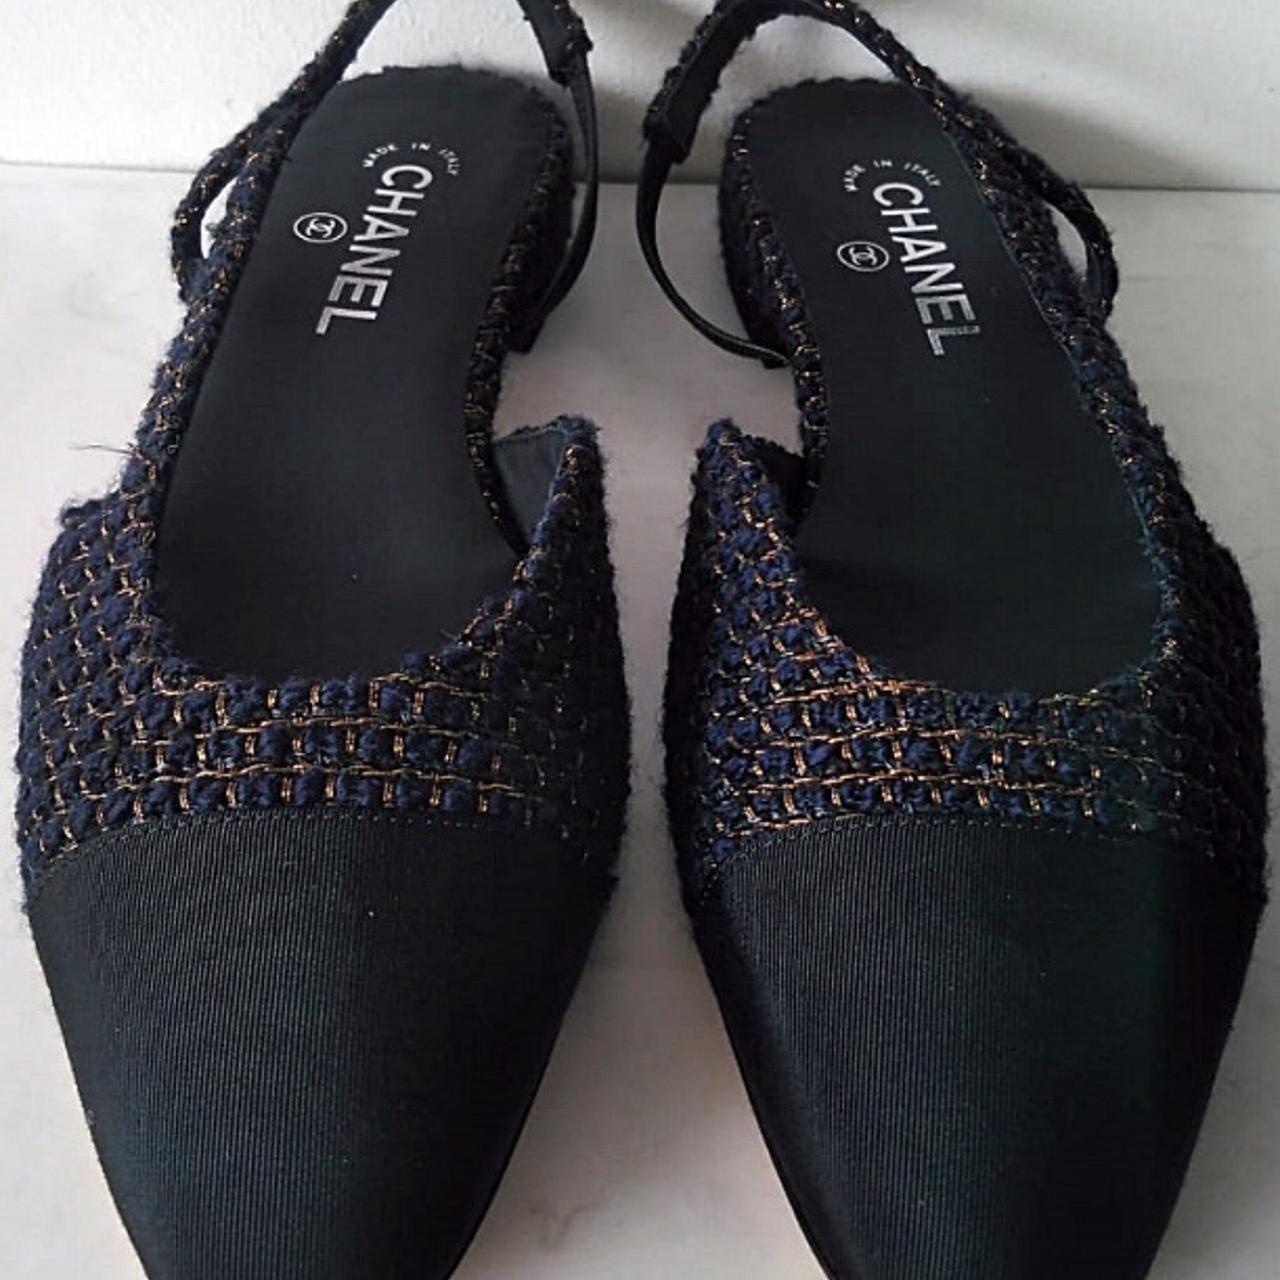 Authentic Chanel slingbacks. Beautiful navy suede - Depop